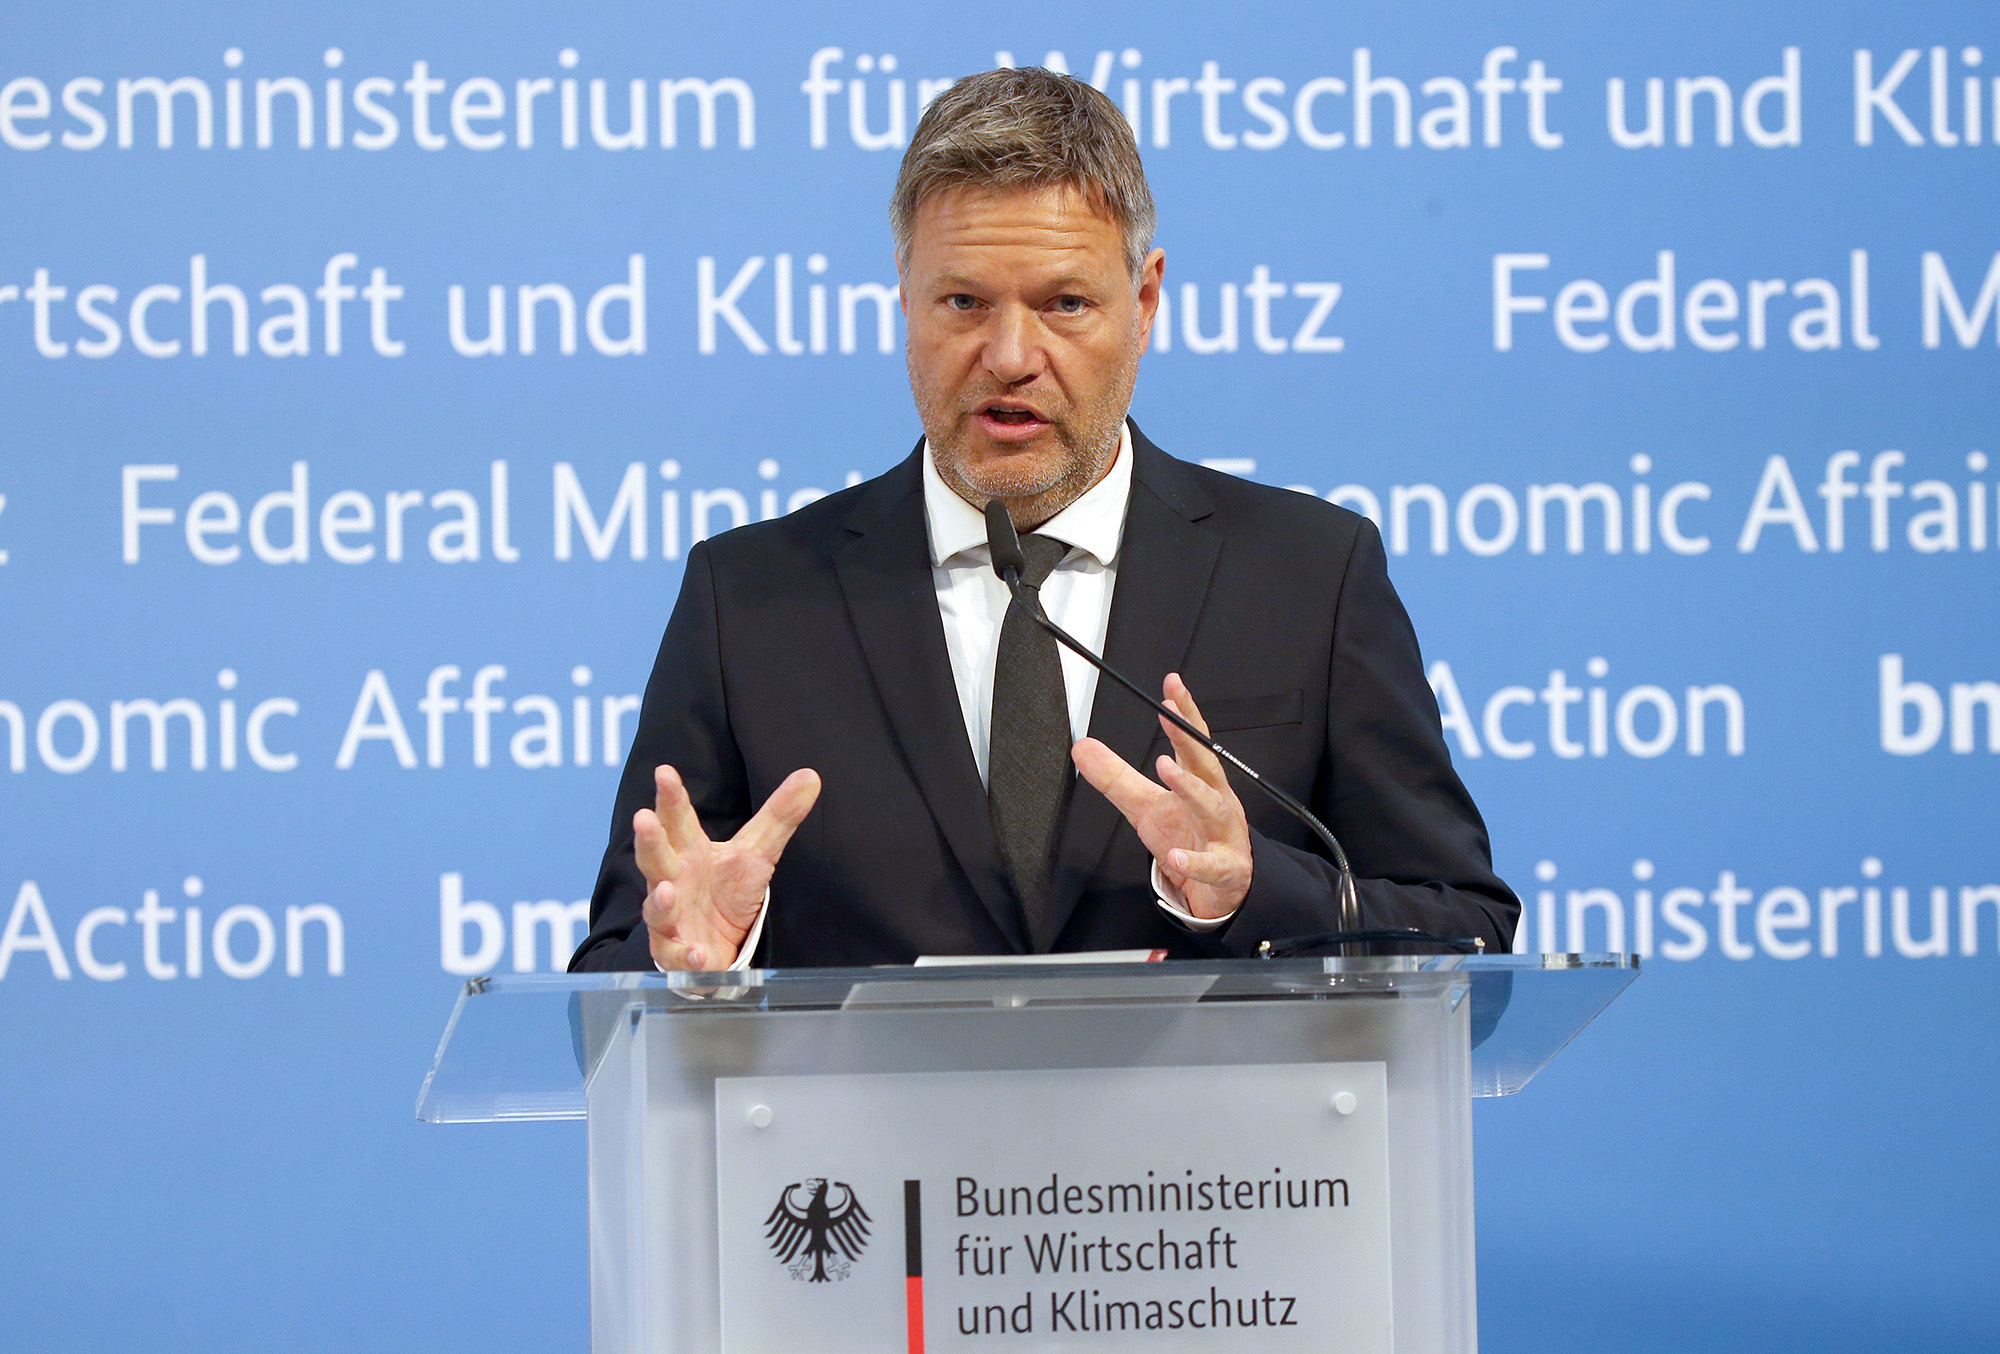 Robert Habeck, Federal Minister of Economics, gives a statement in his ministry in Berlin, Germany, on the Russian sanctions in the energy sector on May 12.